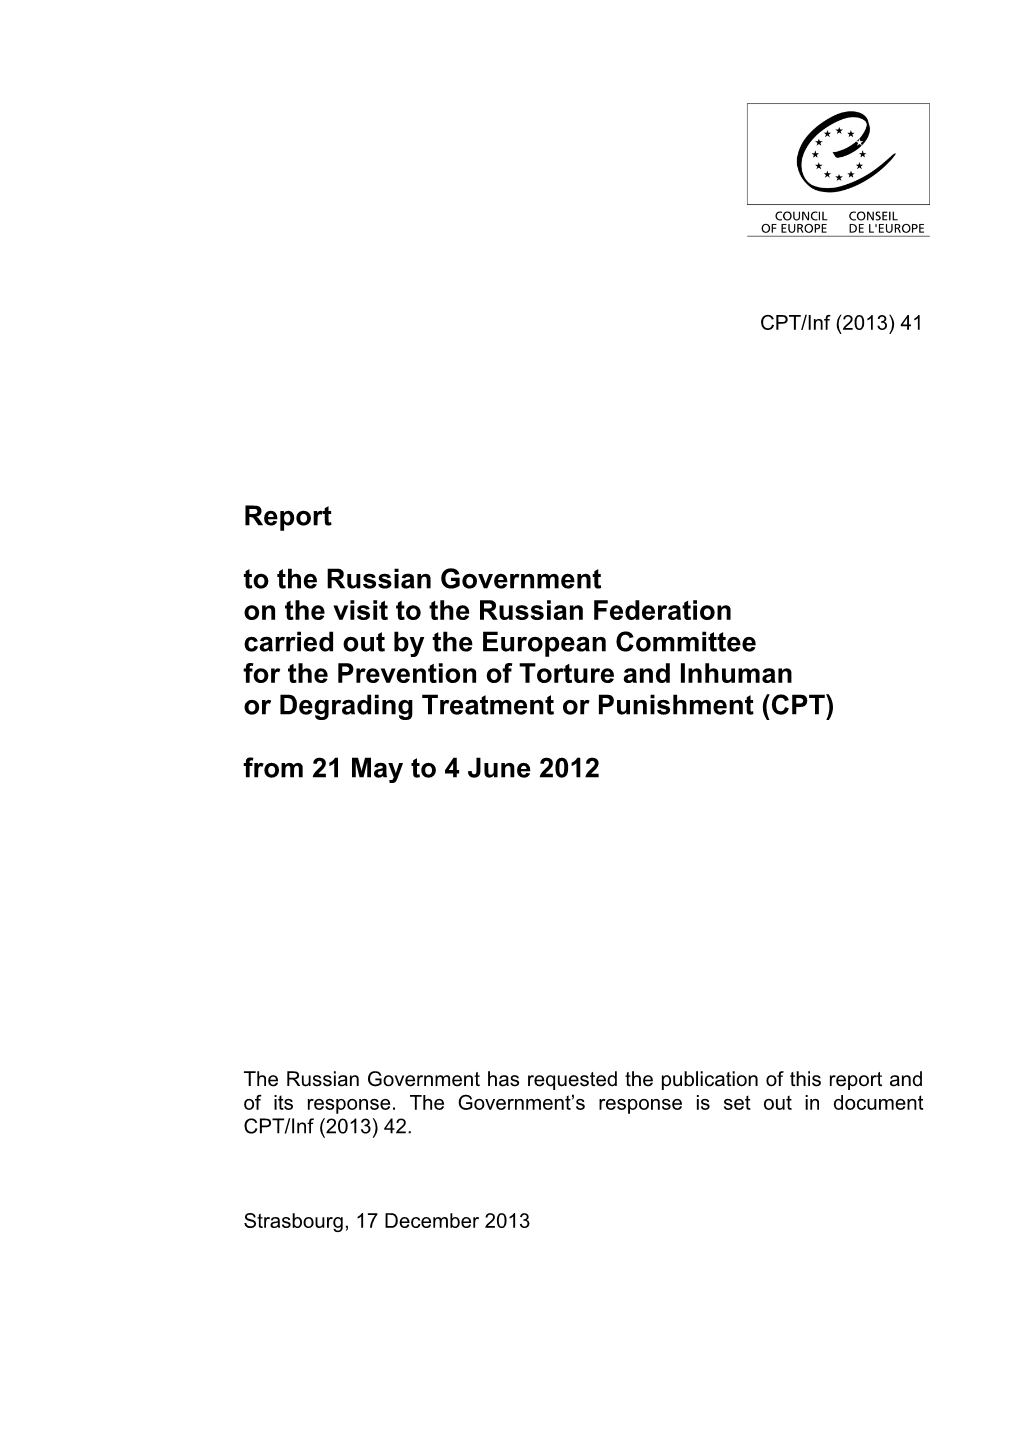 Report on the Russian Federation